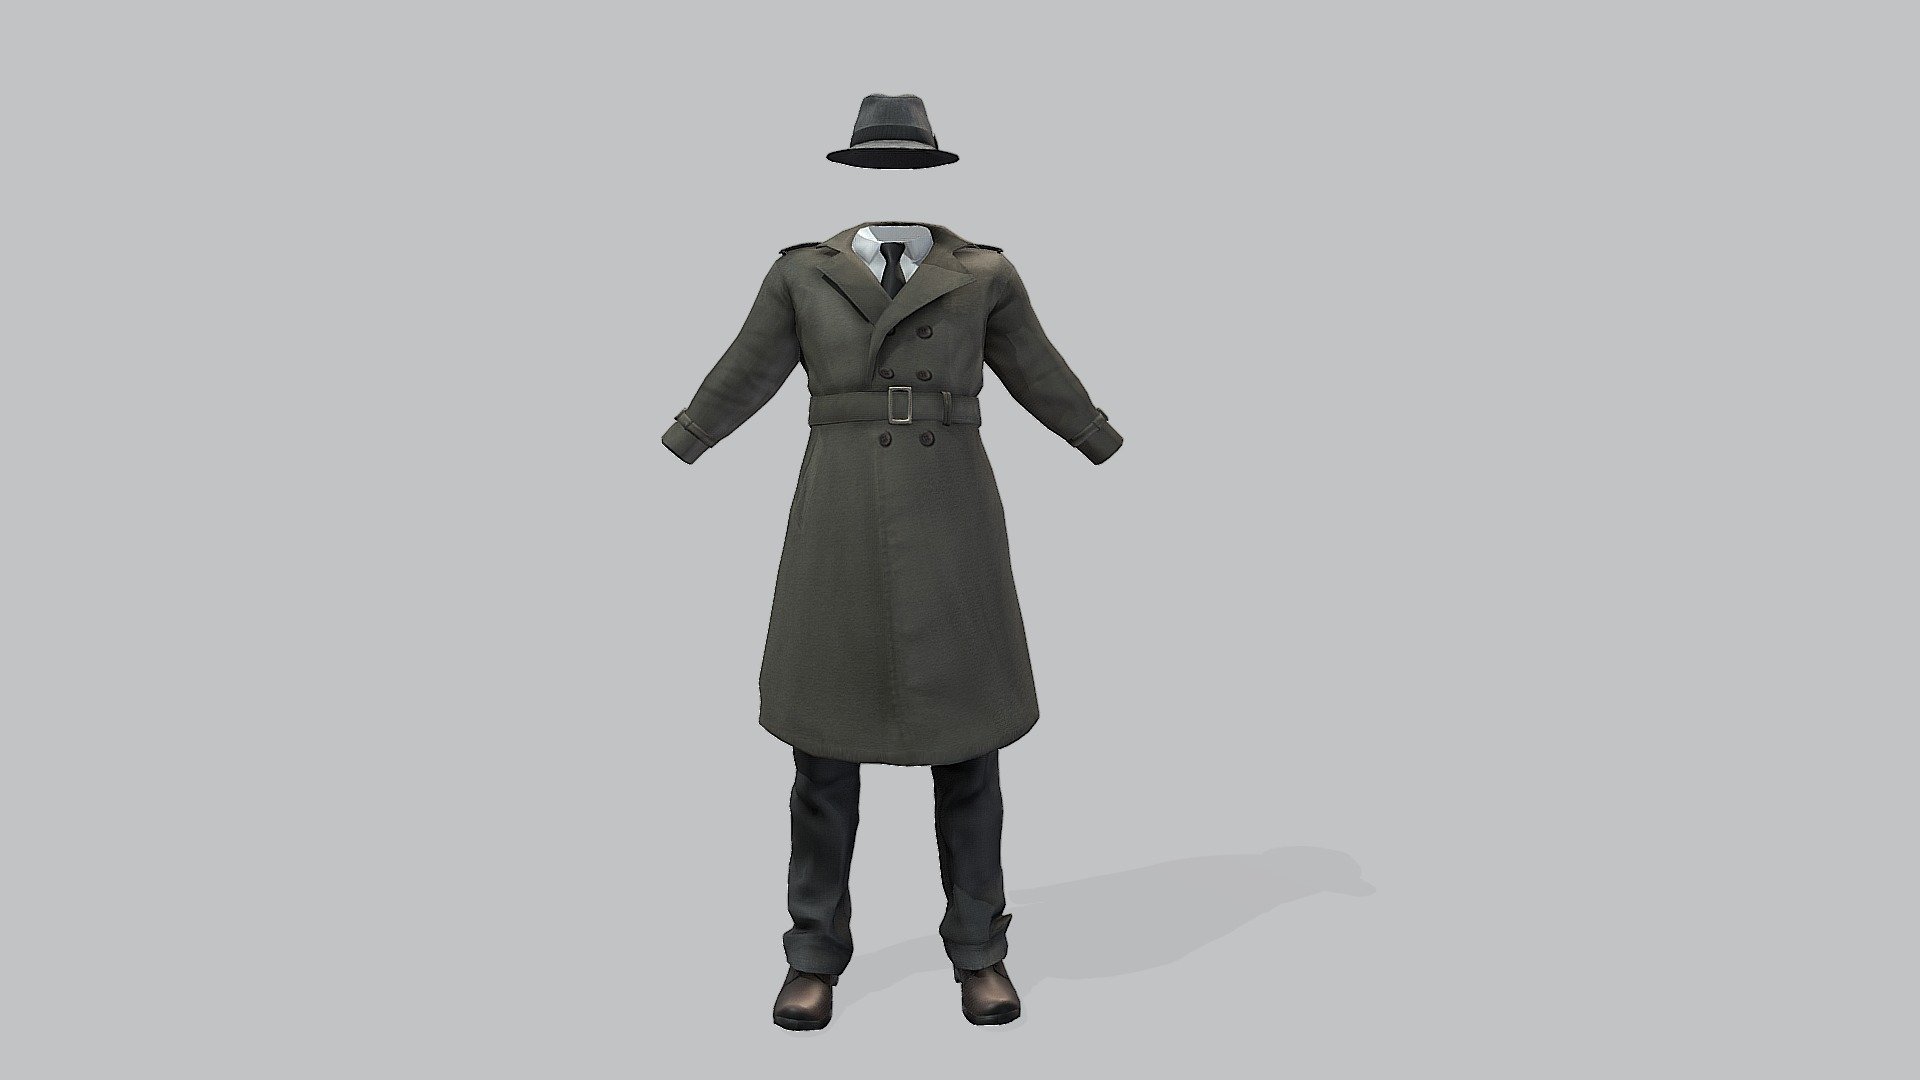 Hat, Outfit, Shoes are separate objects

Can fit to any character, ready for games

Quads, clean topology

No overlapping unwrapped UVs (left and right shoes share the same uvs)

High quality realistic textues : baked albedo, specular, normals, ao

FBX, OBJ, gITF, USDZ (request other formats)

PBR or Classic

Please ask for any other questions

Type     user:3dia &ldquo;search term